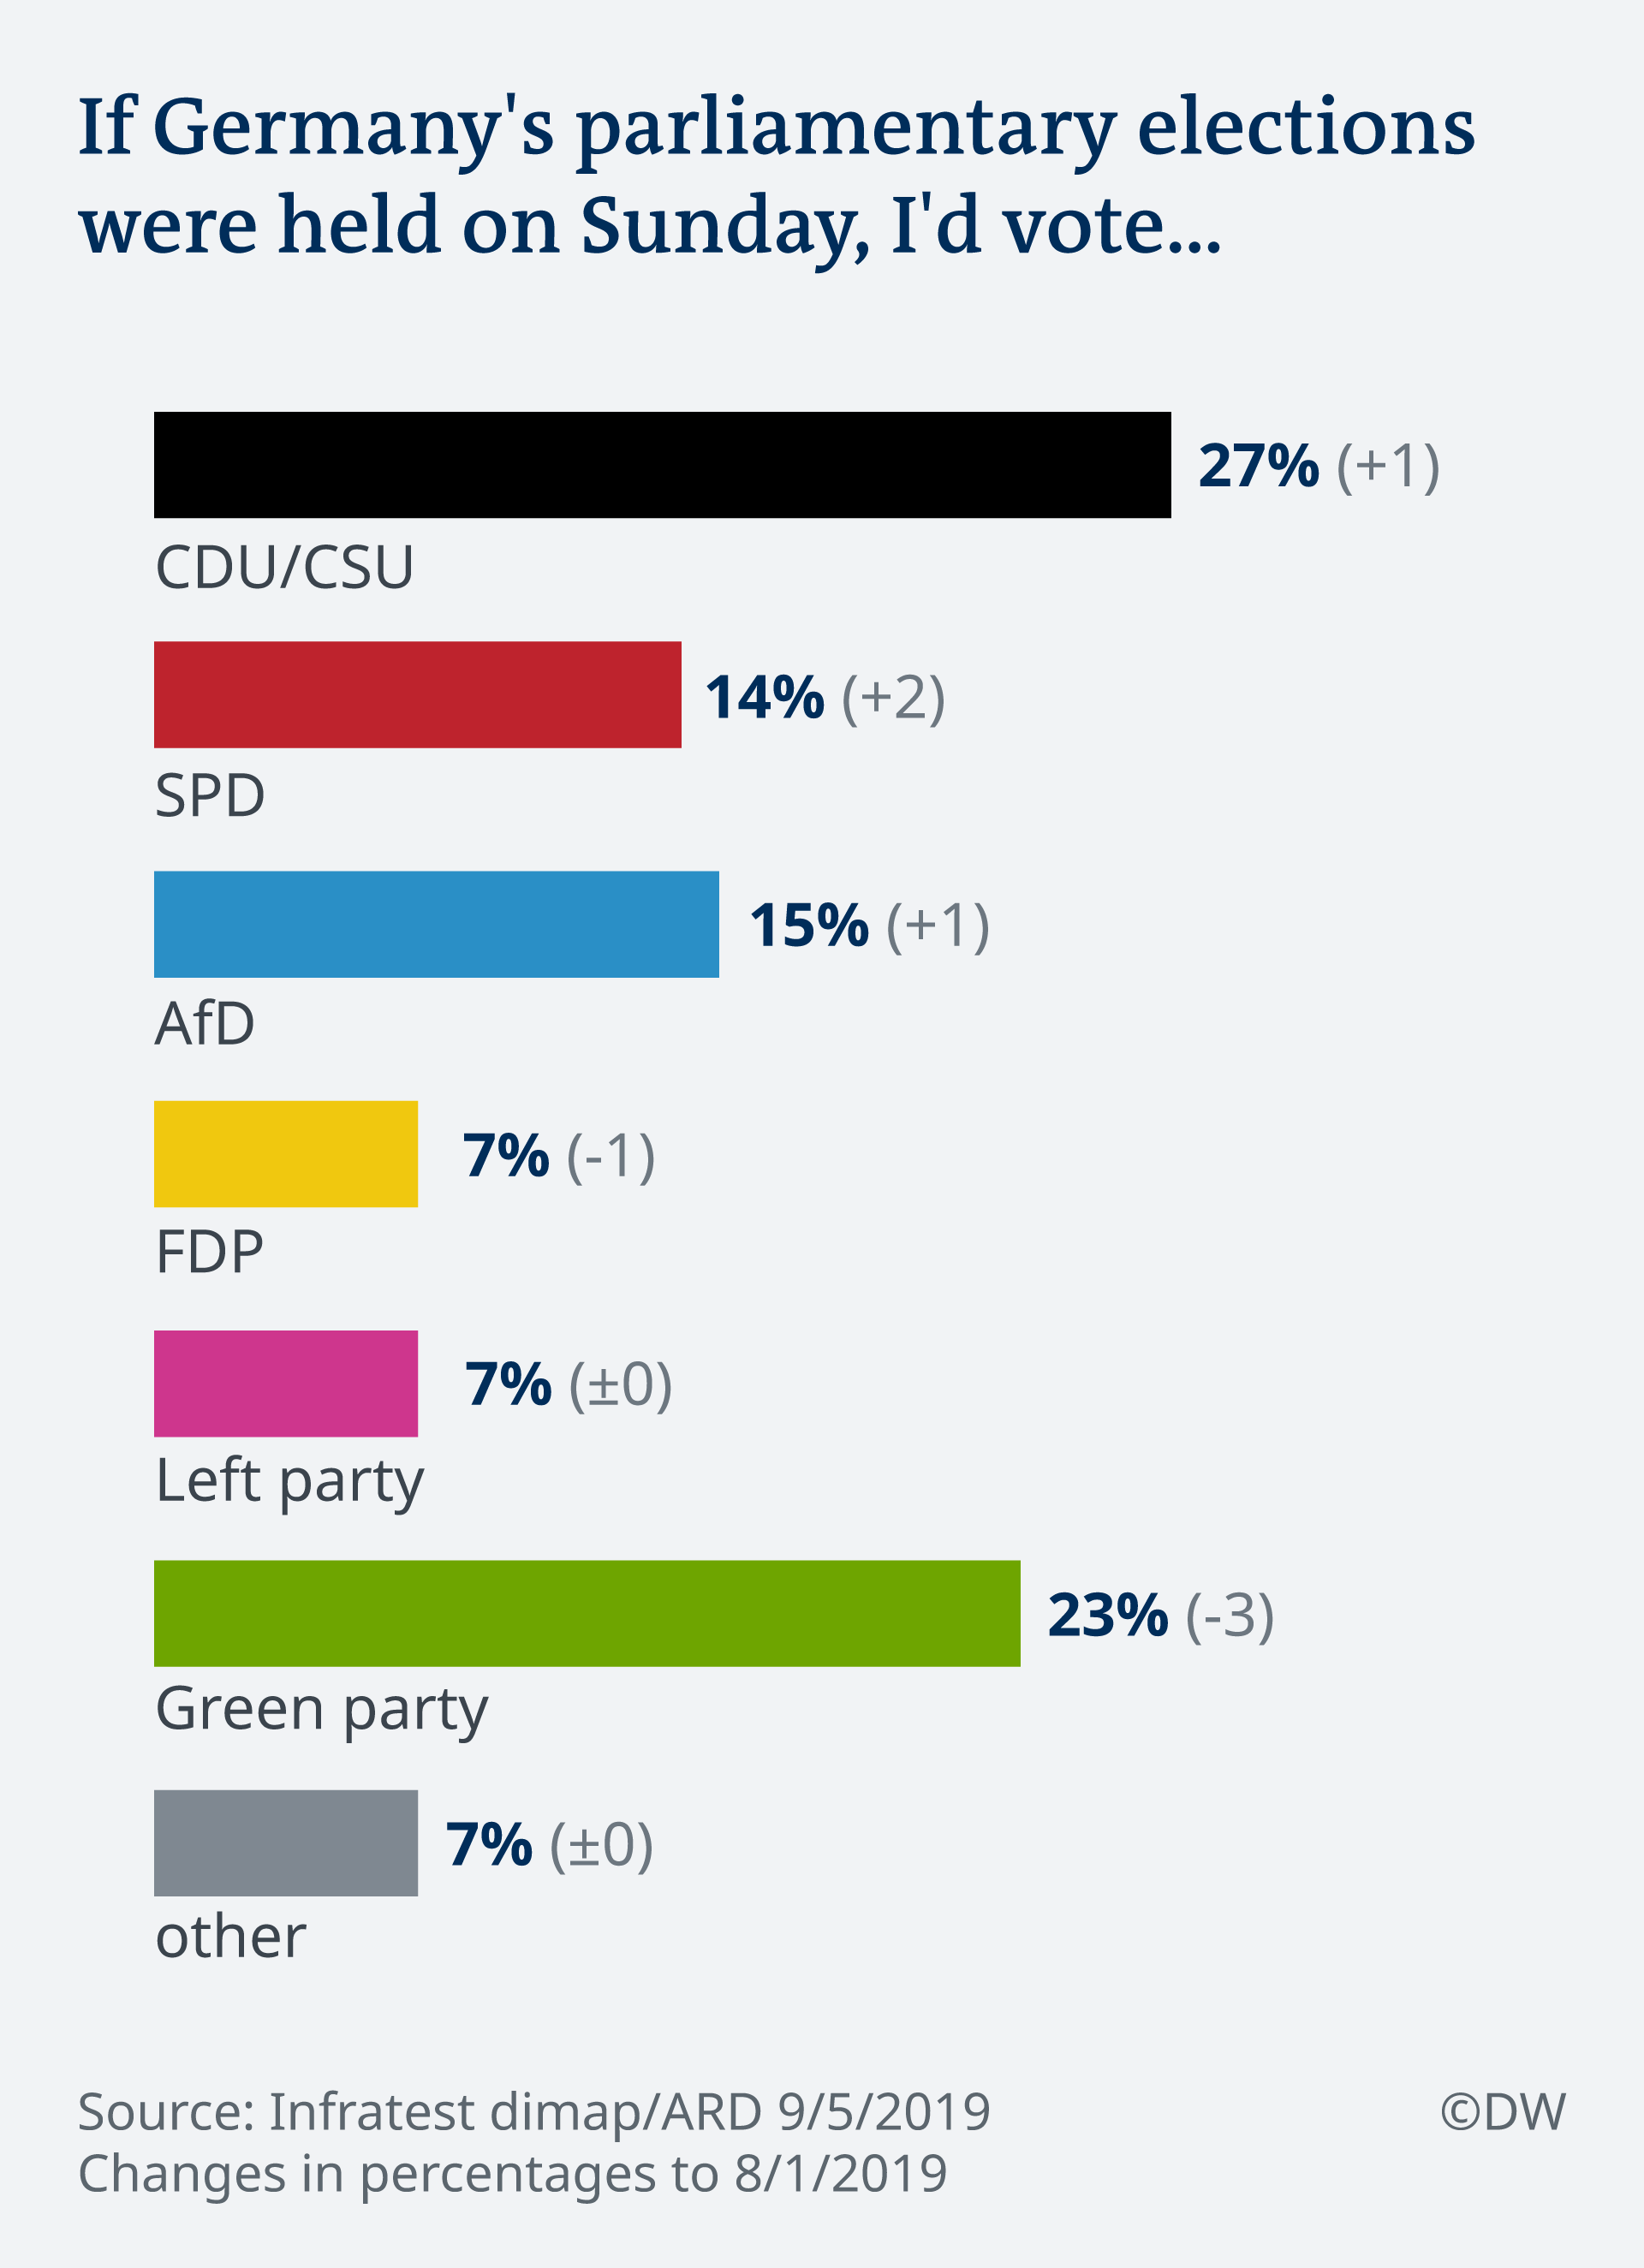 Germans would back CDU by a slim margin if election were held today